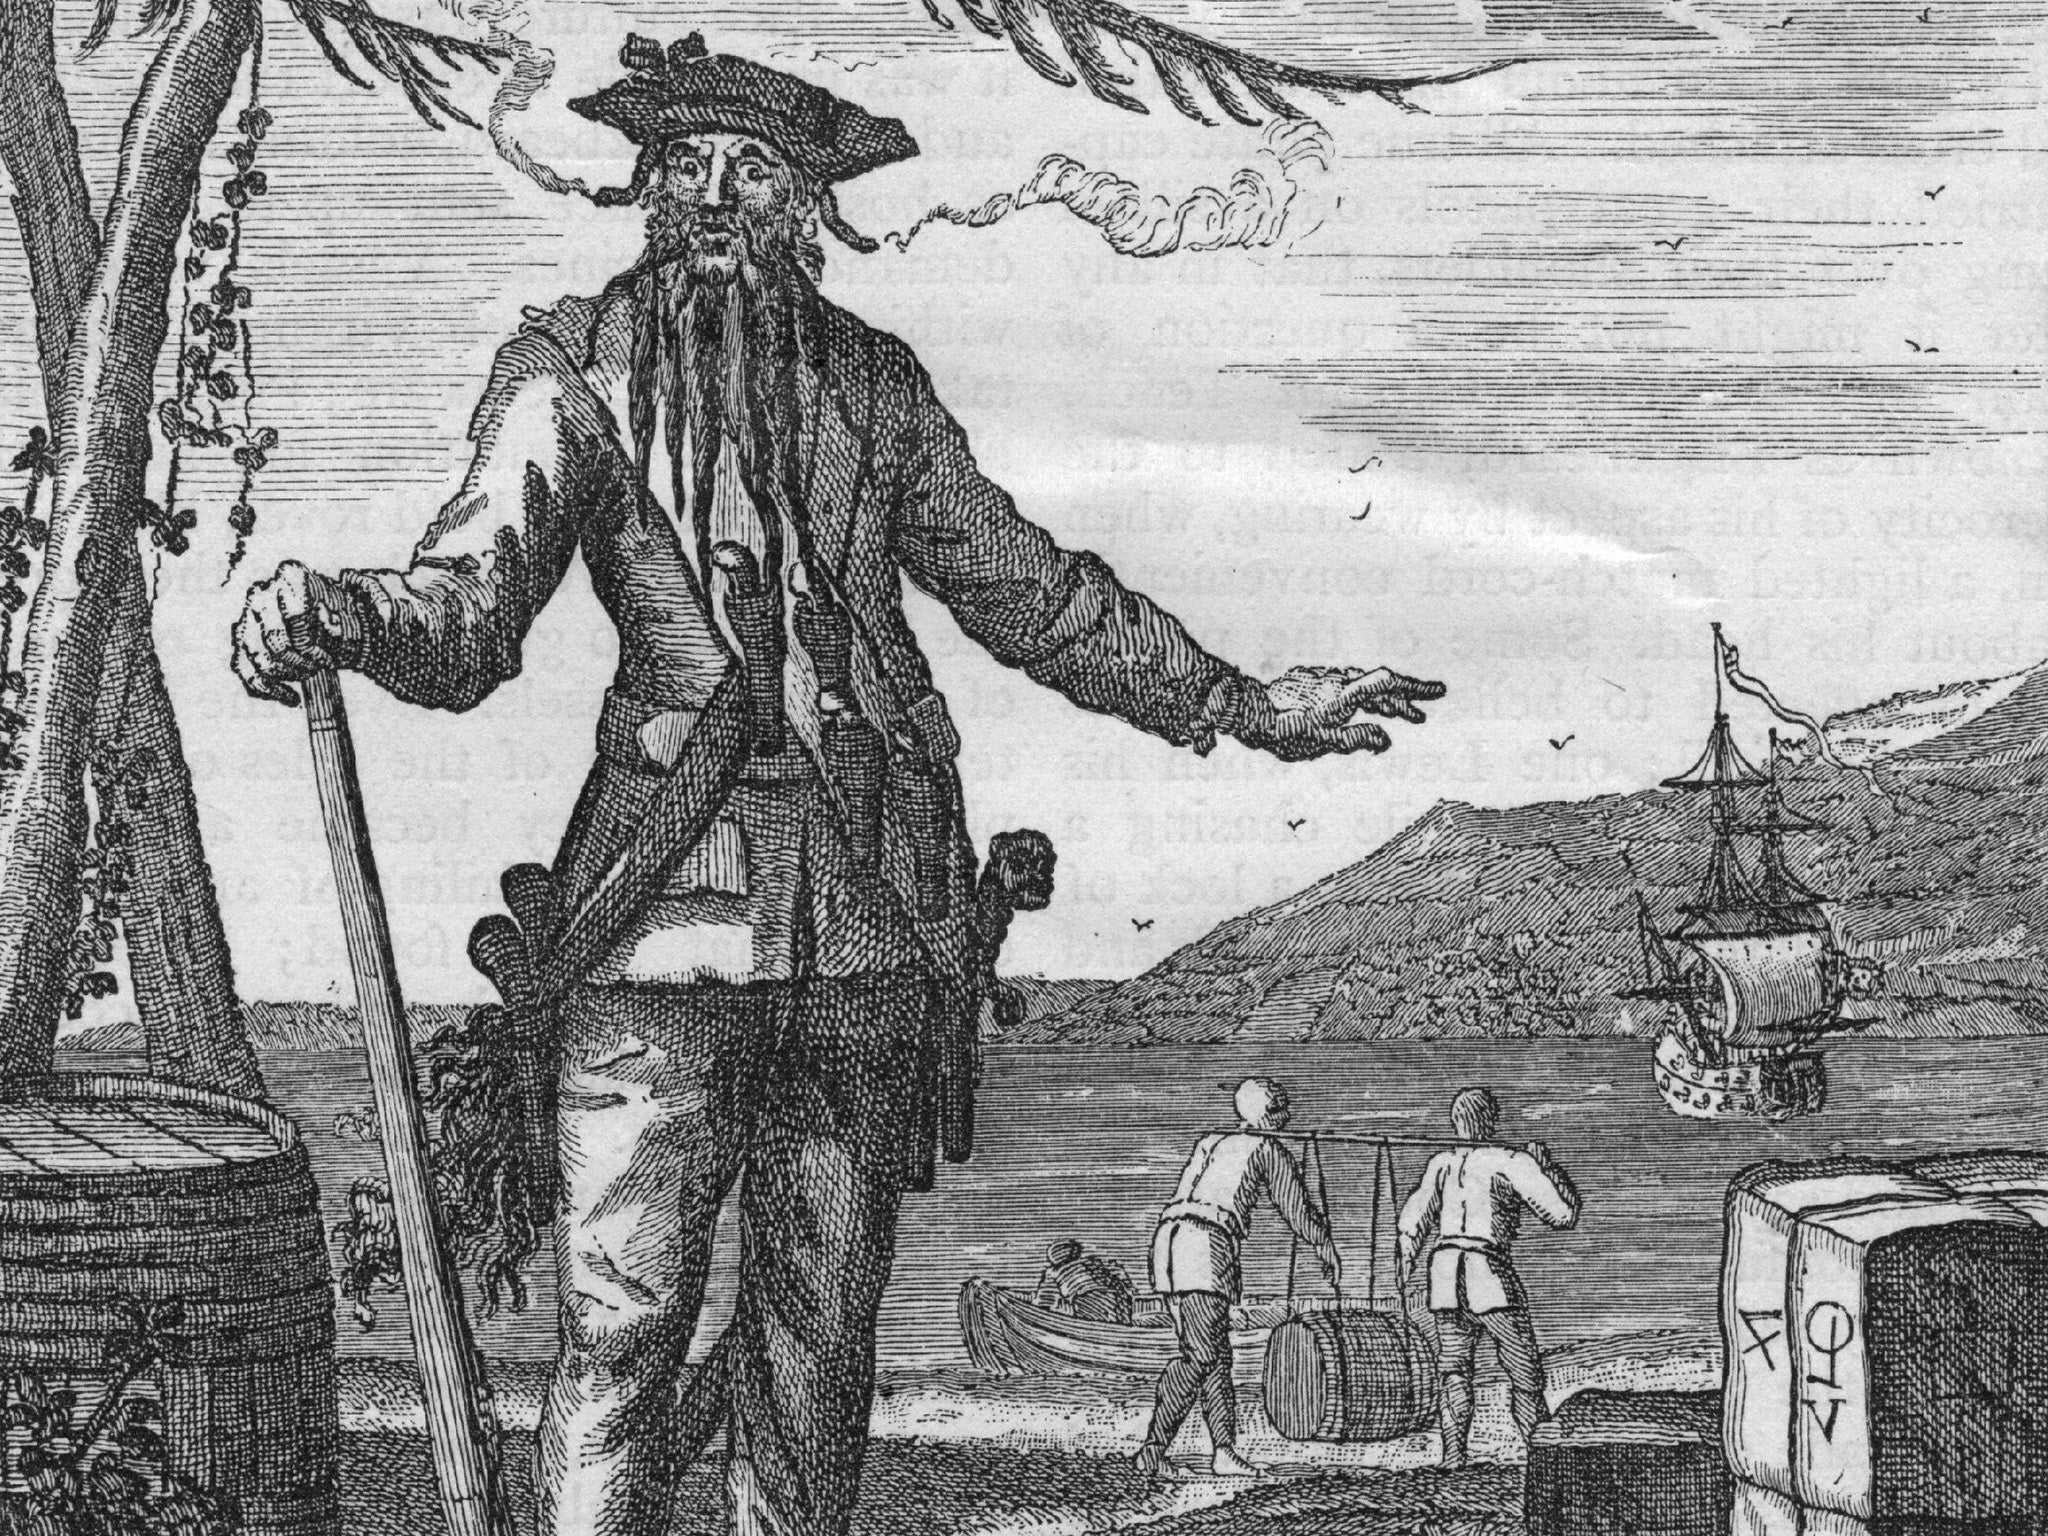 Not even Blackbeard could match Sam Bellamy for the wealth he plundered